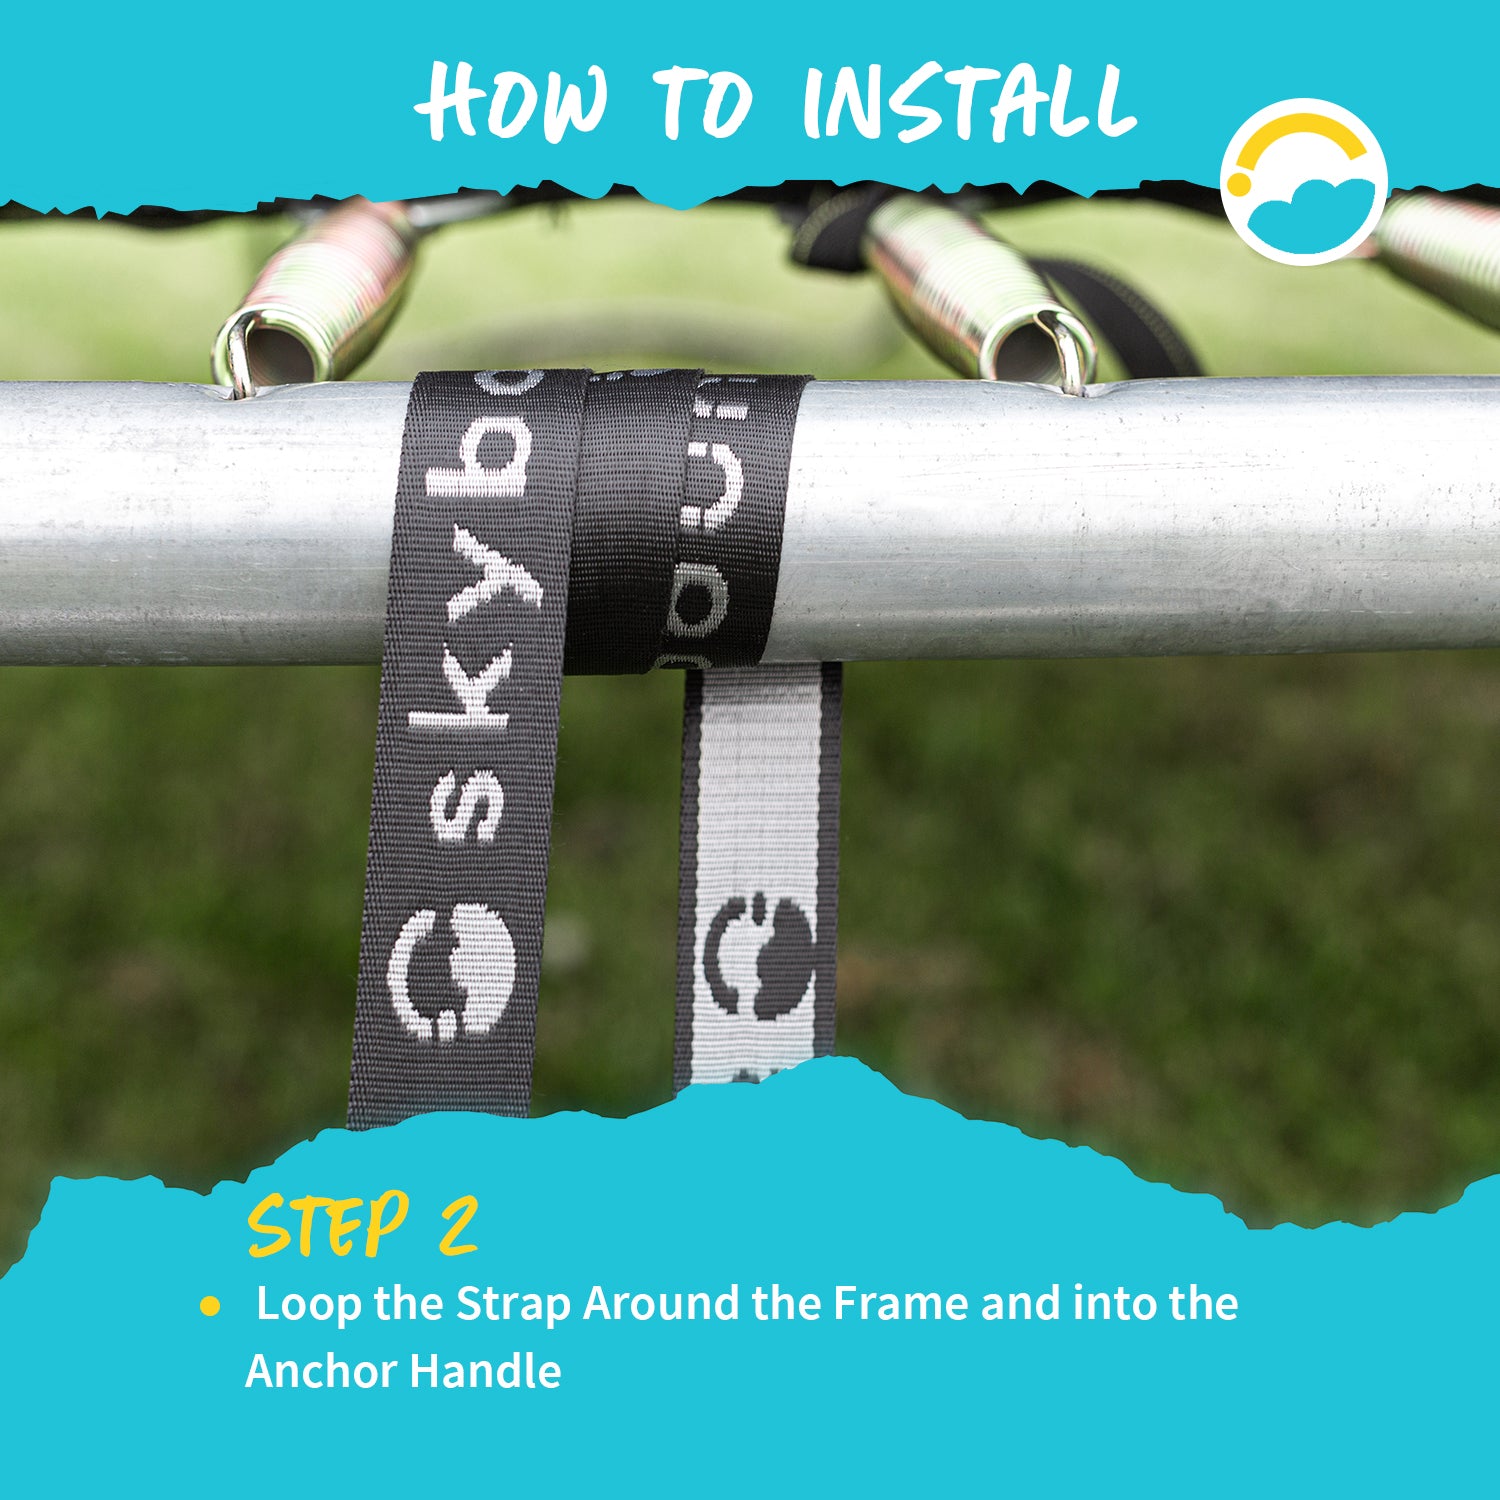 How to Install: Step 2-Loop the Strap Around the Frame and into the Anchor Handle.